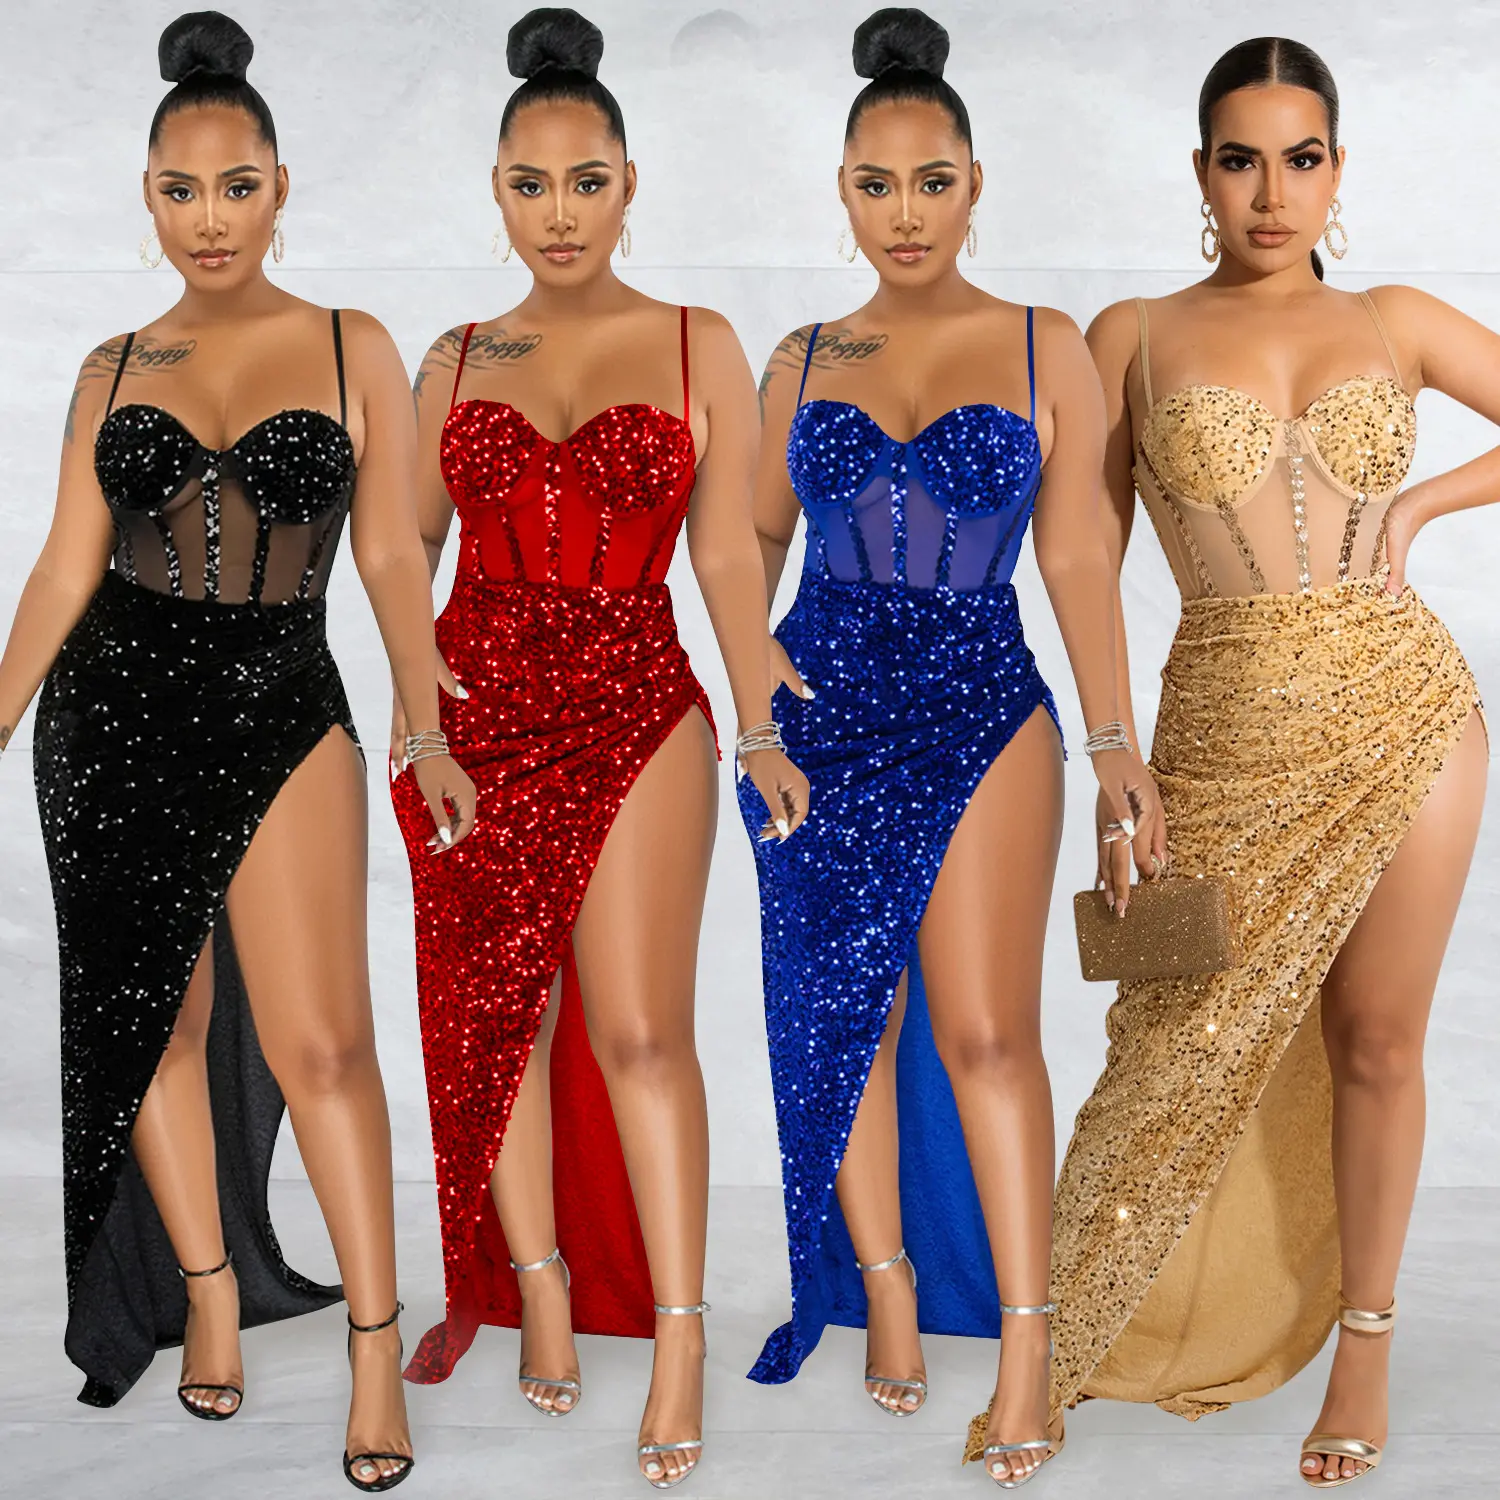 Sparkly Spaghetti Strap Sequins High Slit Sexy Party Club Dress Women Bodycon Long Cocktail Prom Gown Plus Size Evening Dress